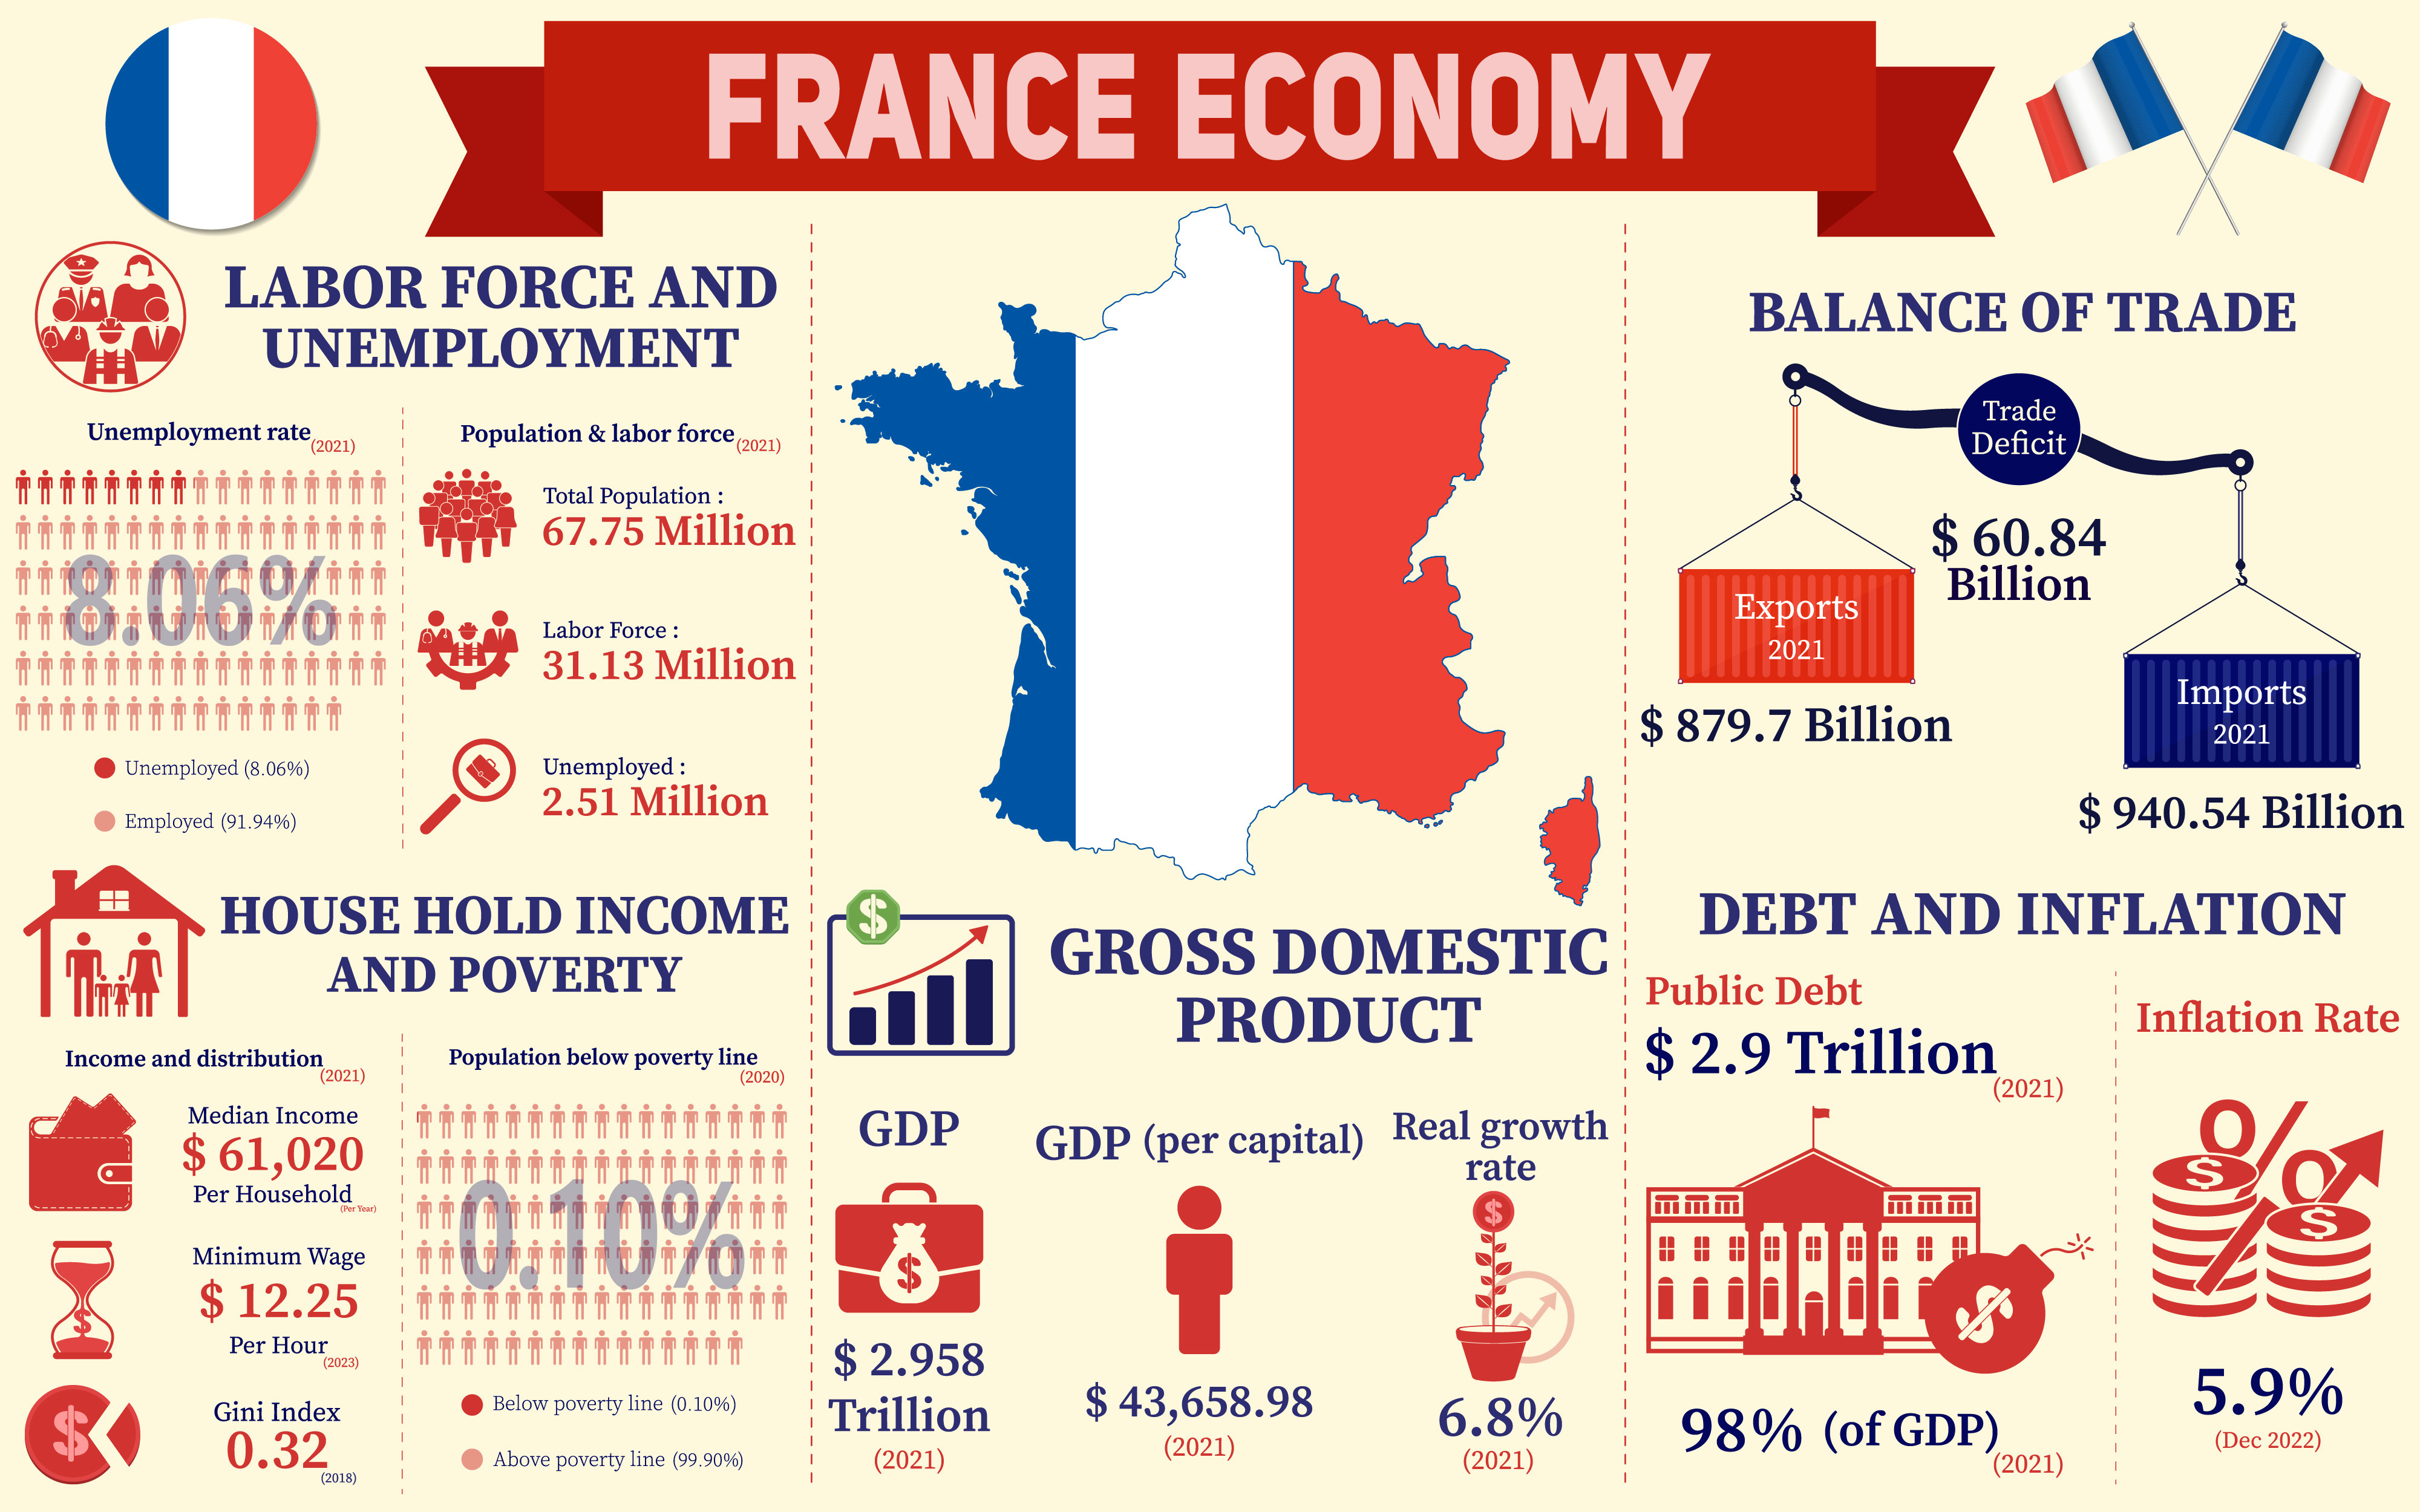 France Economy Infographic Data Charts Graphic by terrabismail